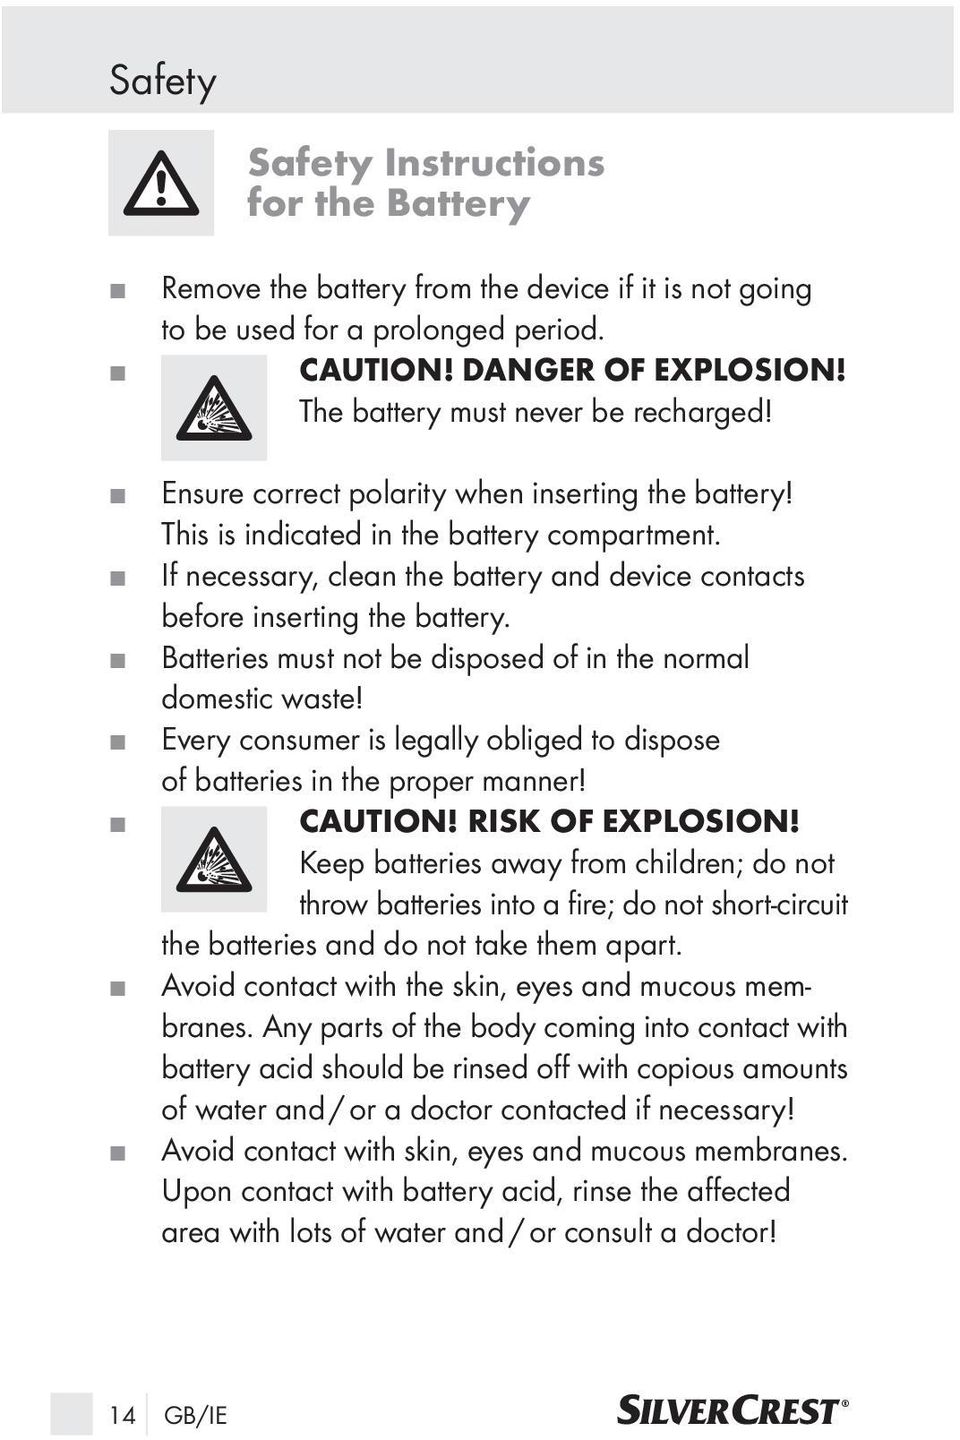 Batteries must not be disposed of in the normal domestic waste! Every consumer is legally obliged to dispose of batteries in the proper manner! CAUTION! RISK OF EXPLOSION!